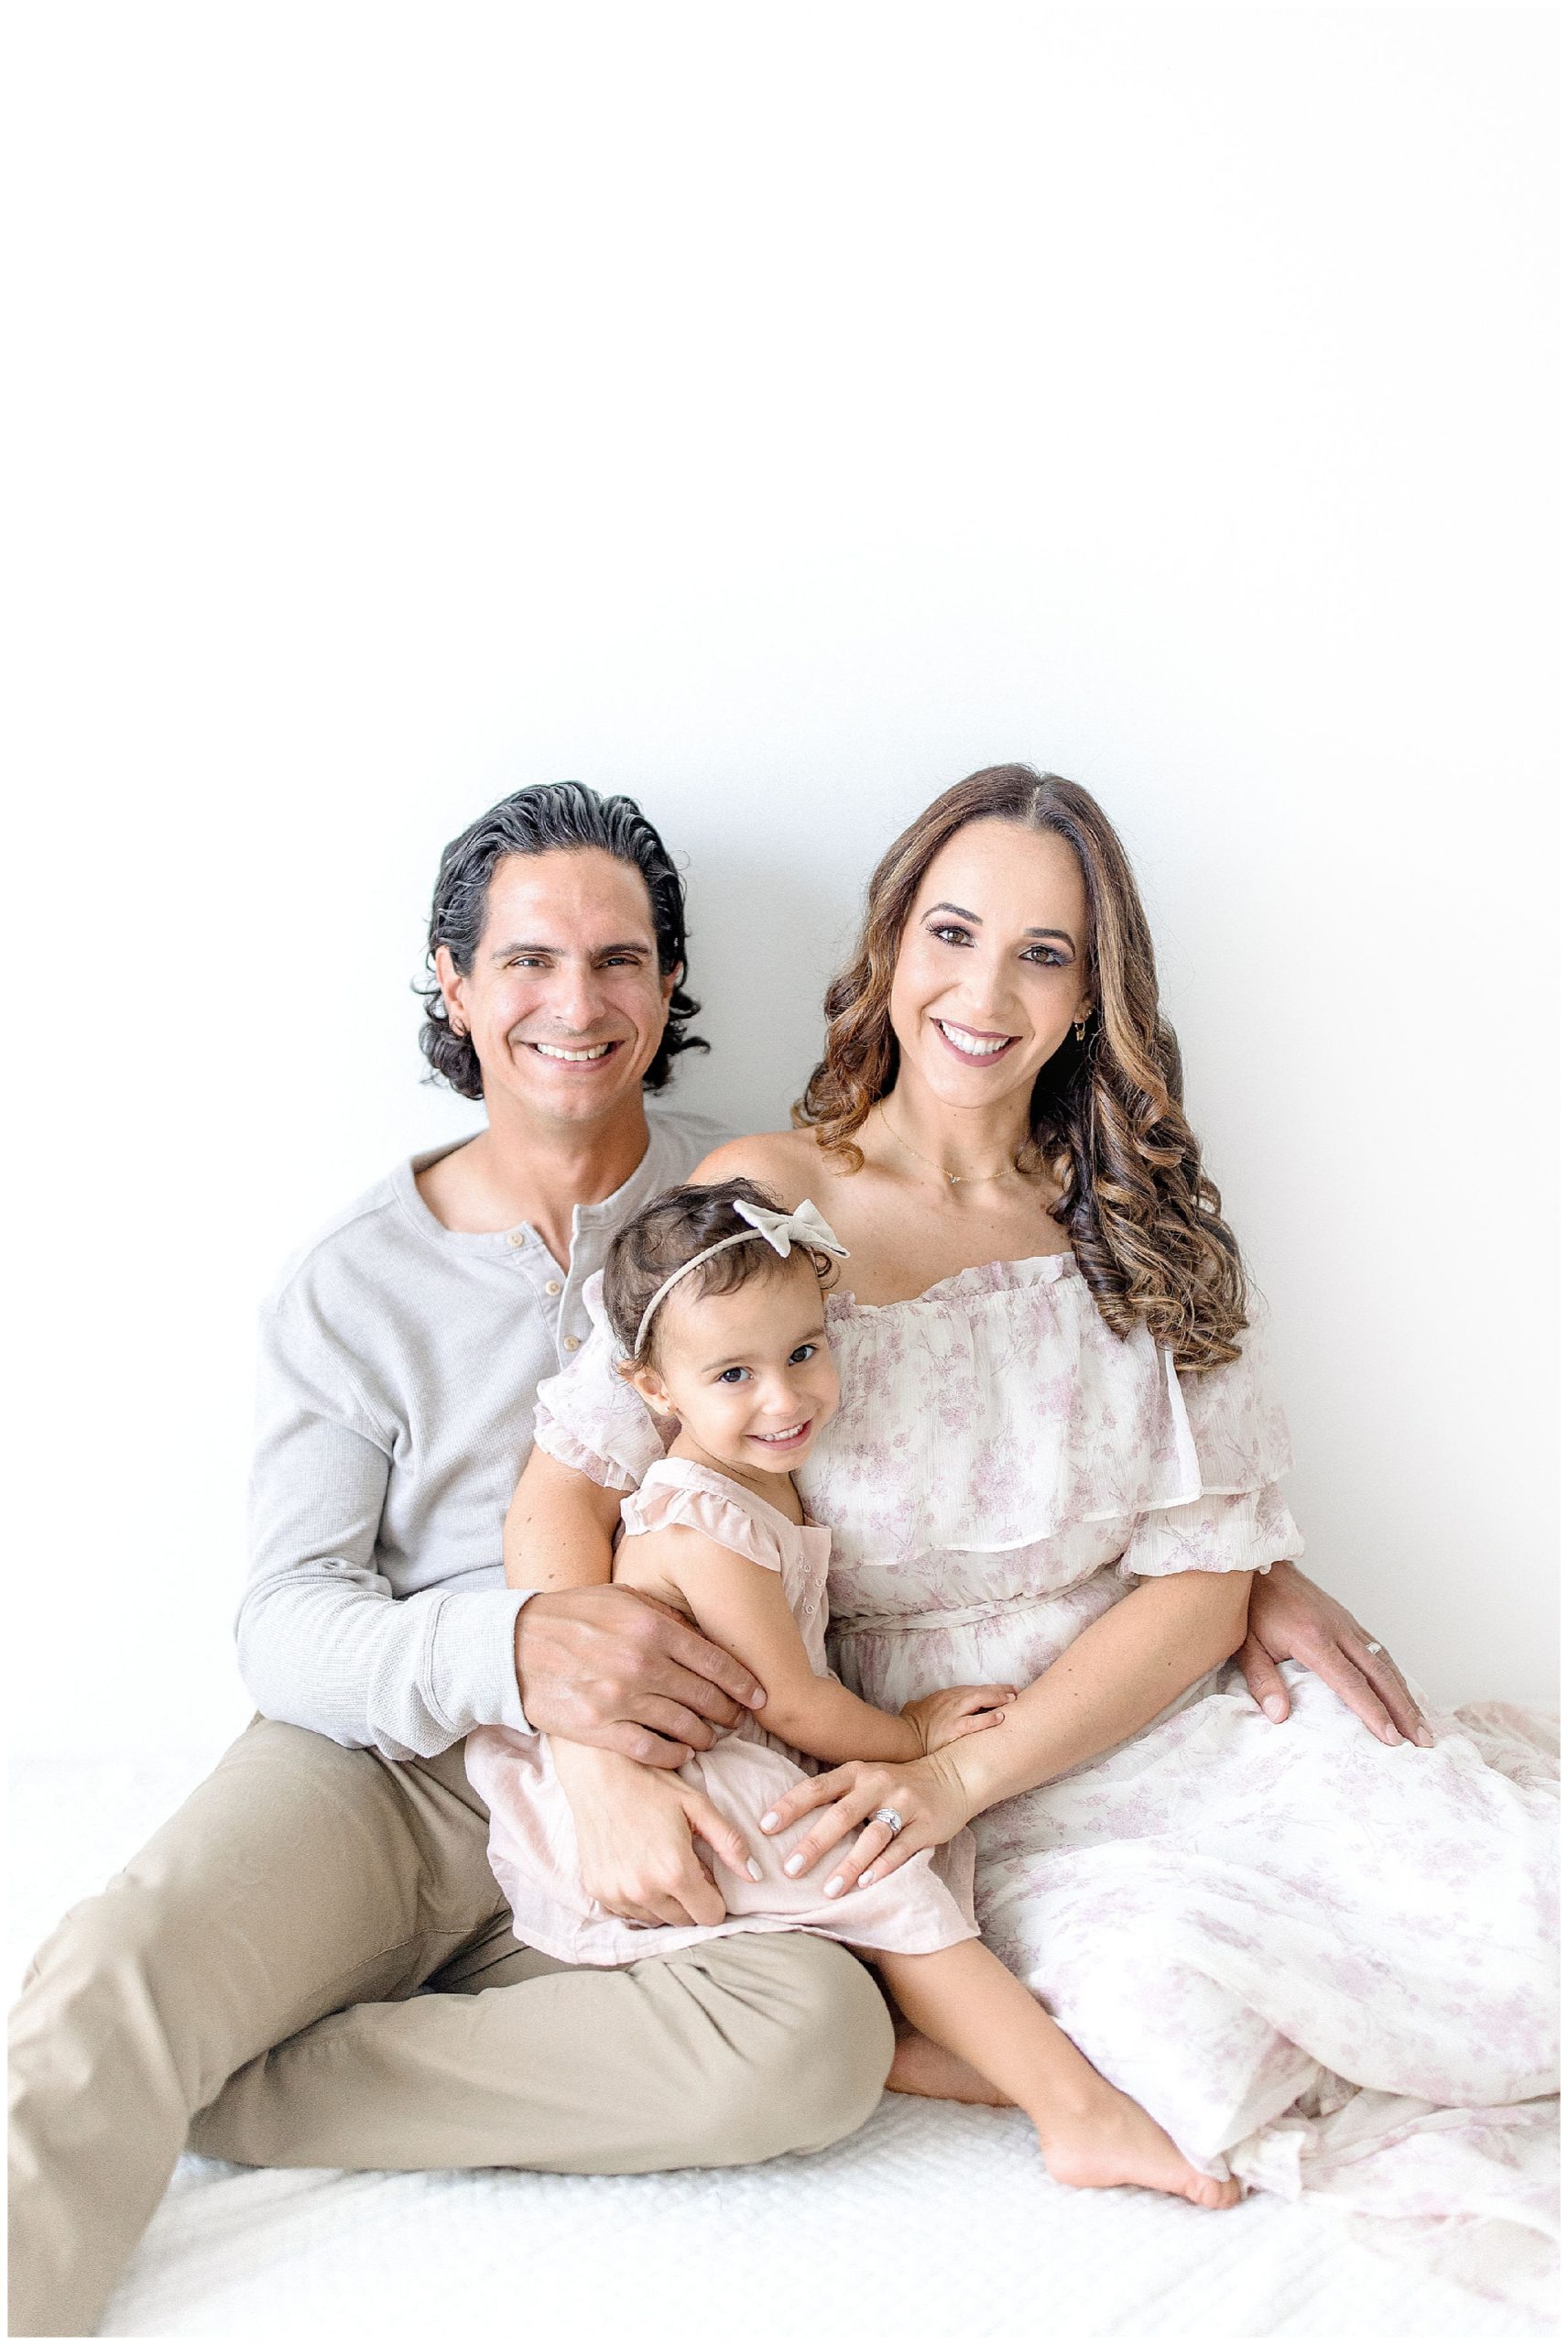 Mom & Dad smile with daughter in Miami studio. Photo by Ivanna Vidal Photography.